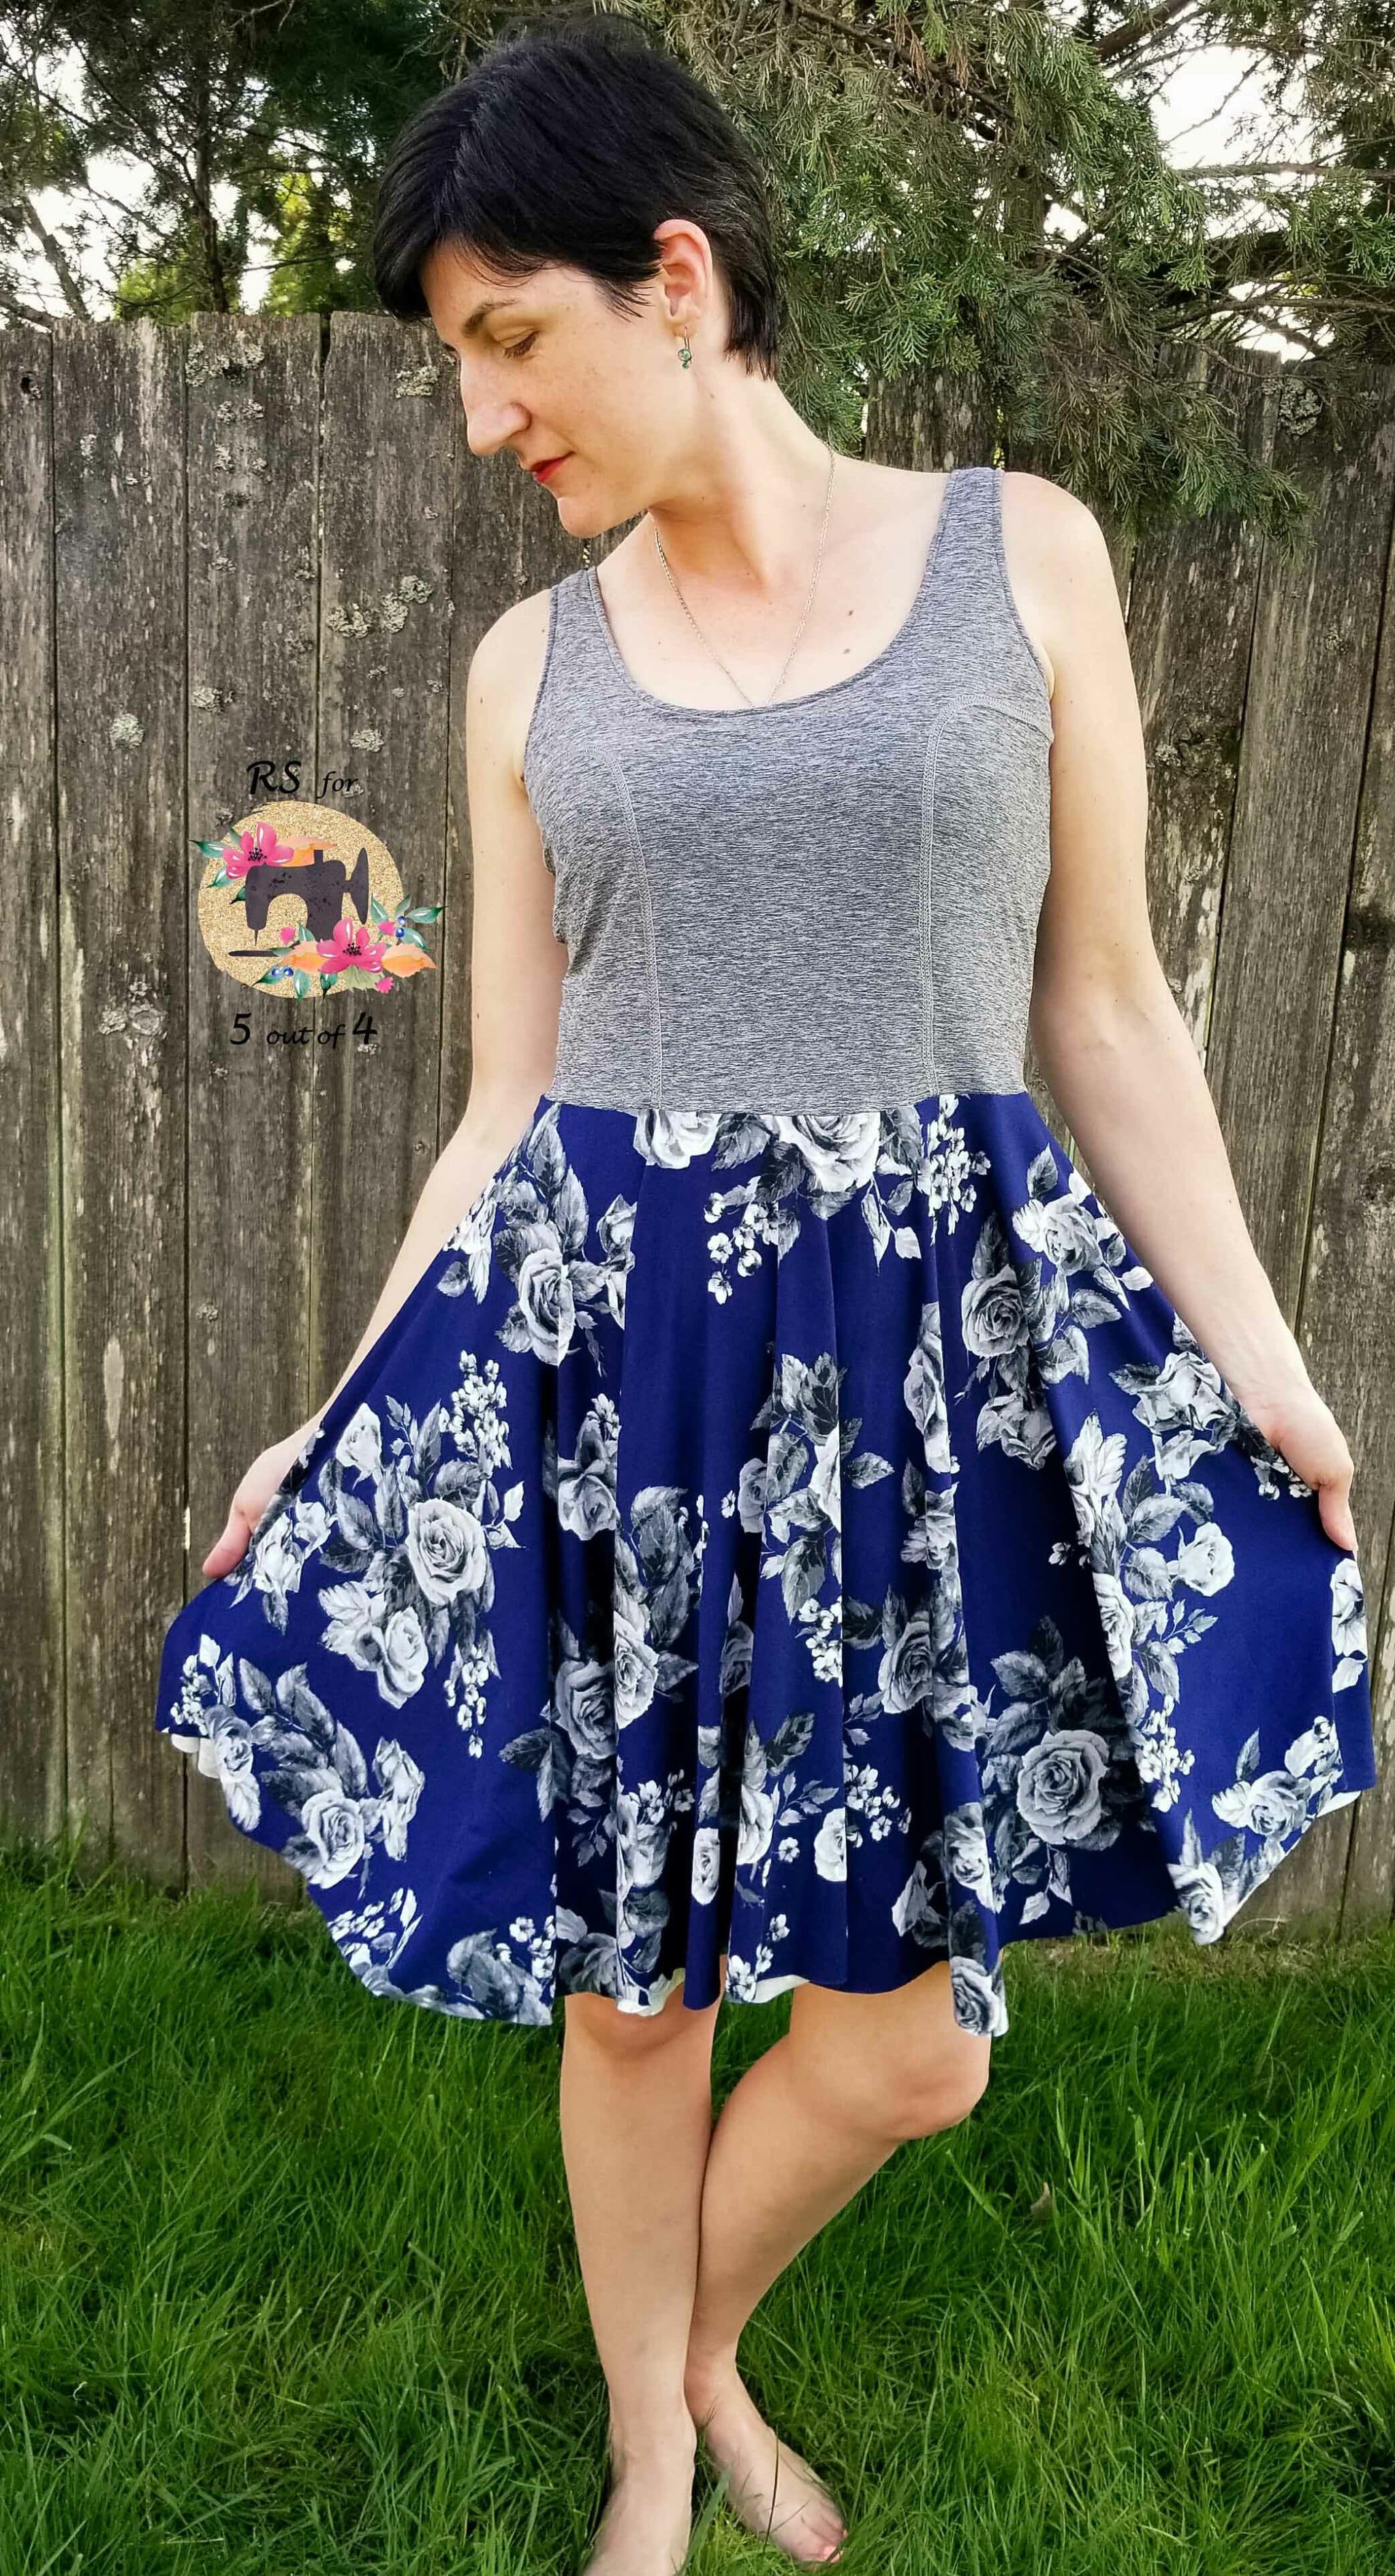 Spring Dress Tour and Sale Day Two - 5 out of 4 Patterns